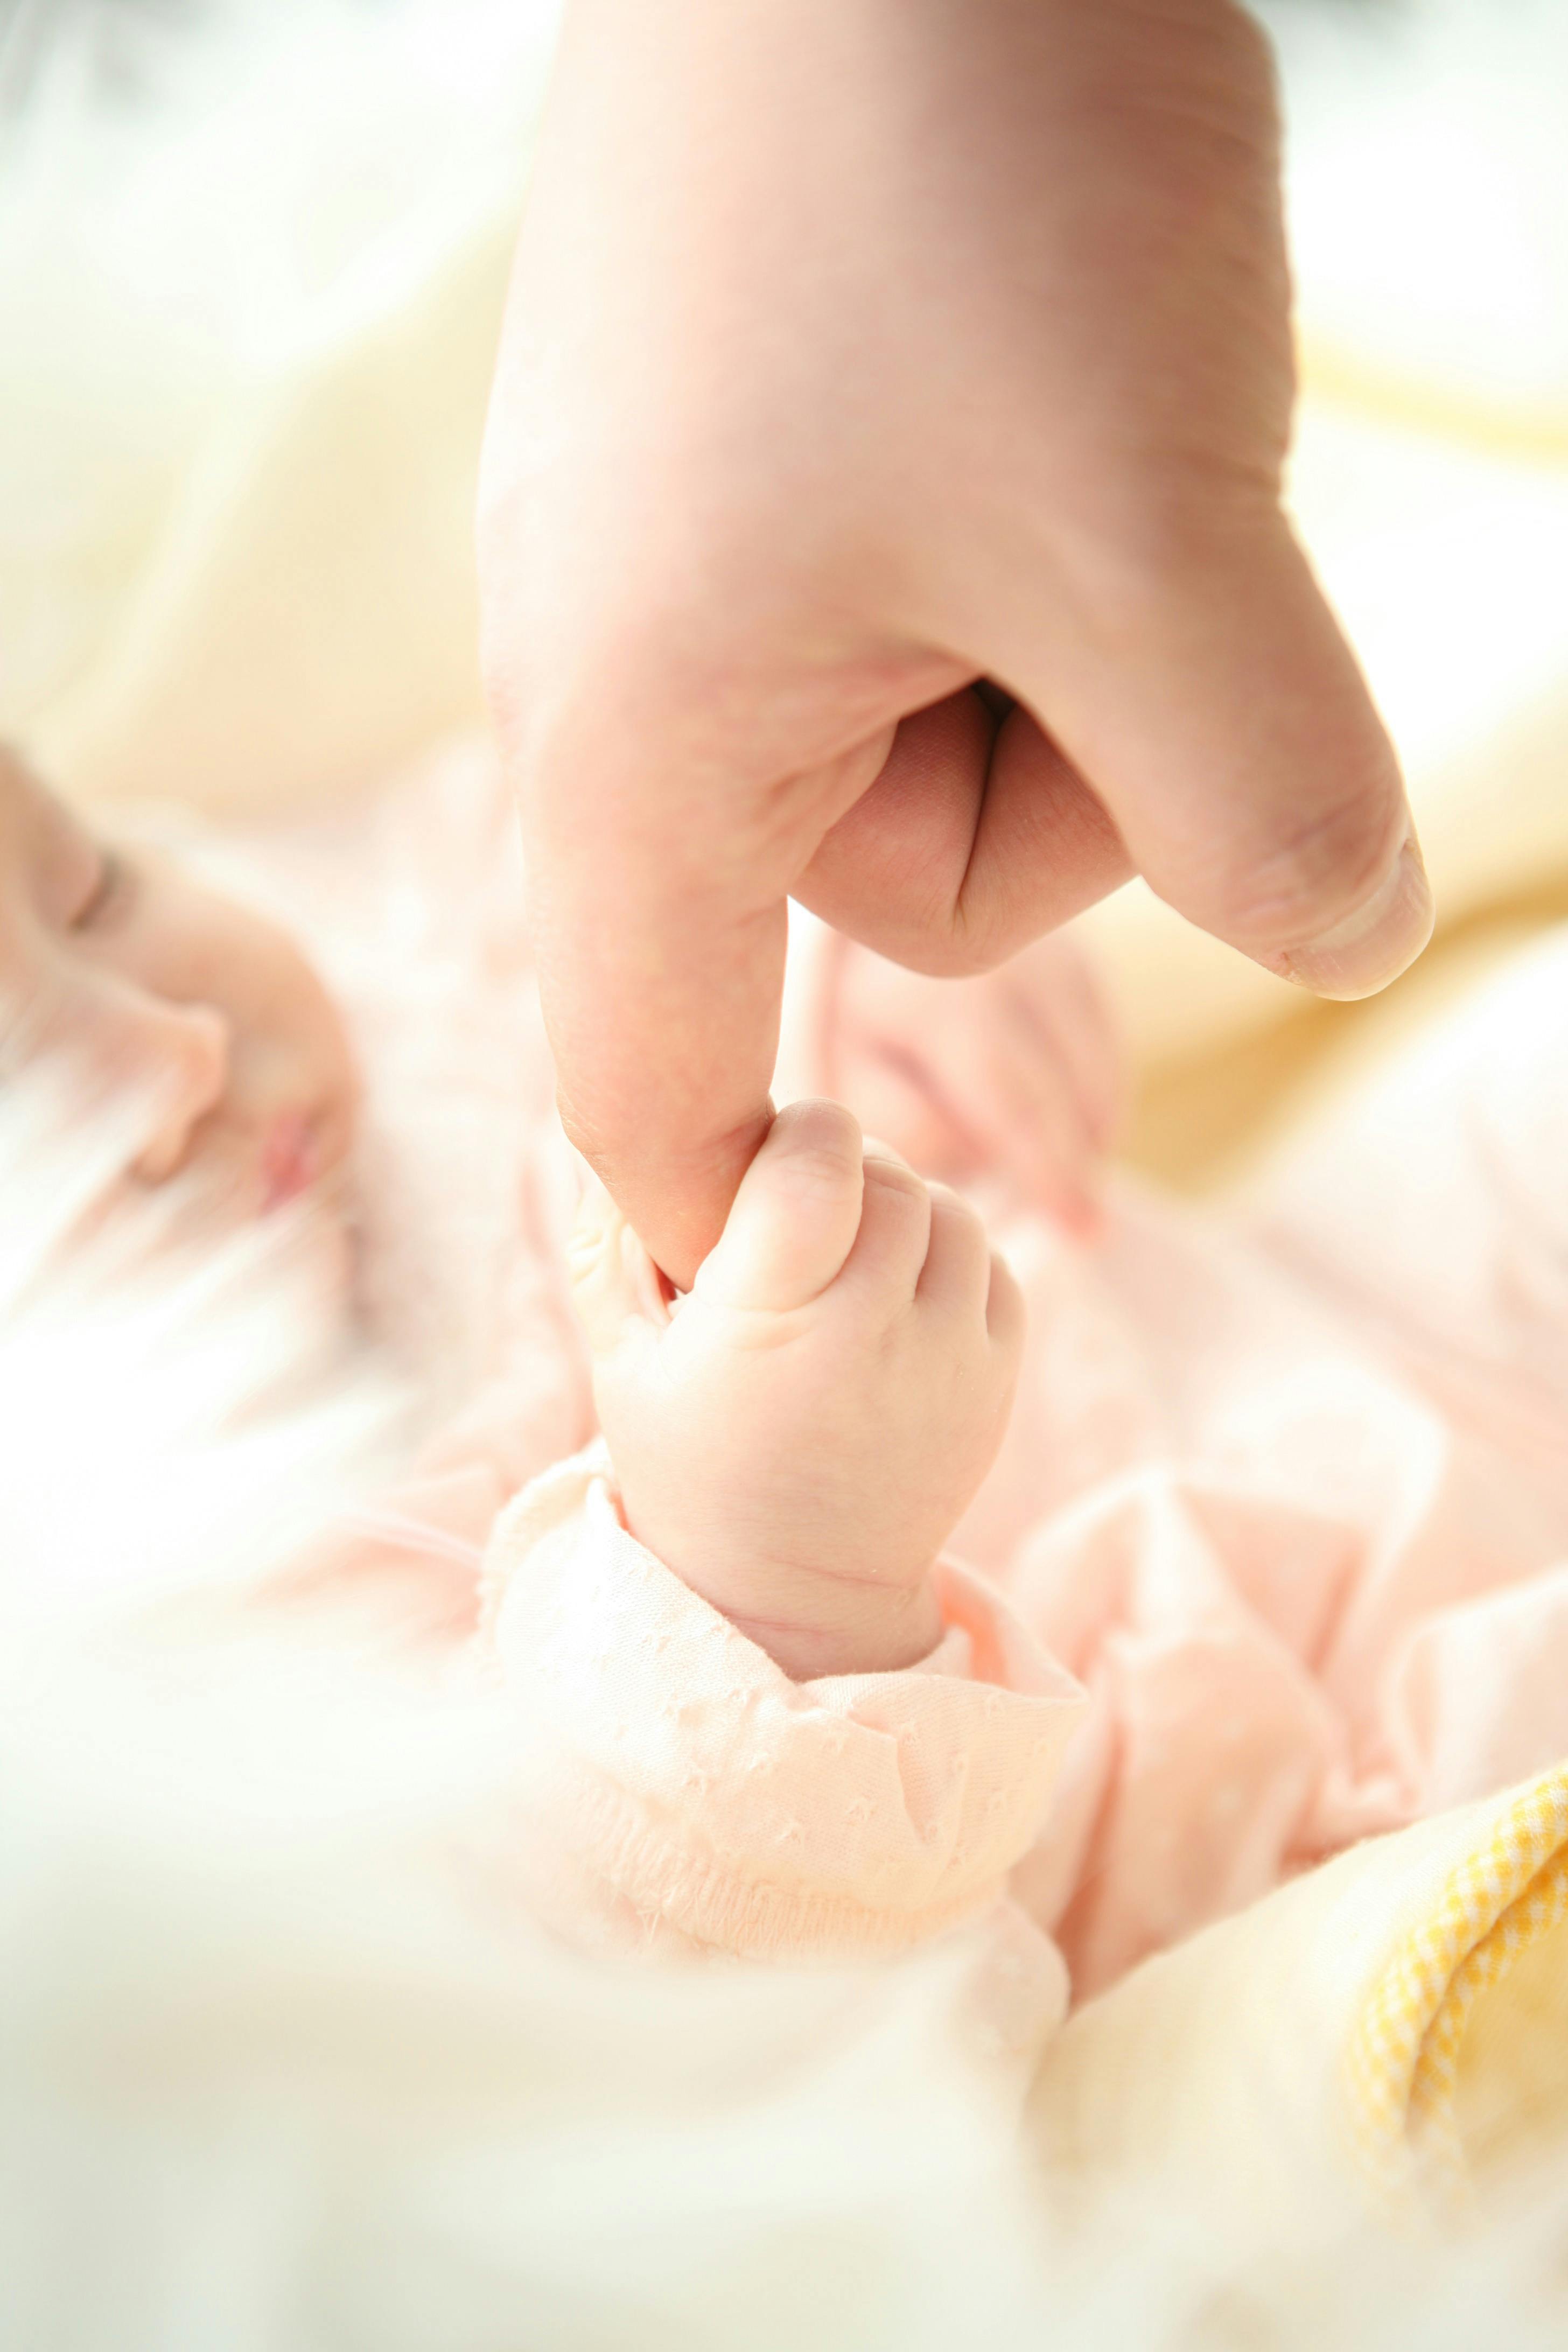 Baby holding his mother's index finger | Photo: Pexels